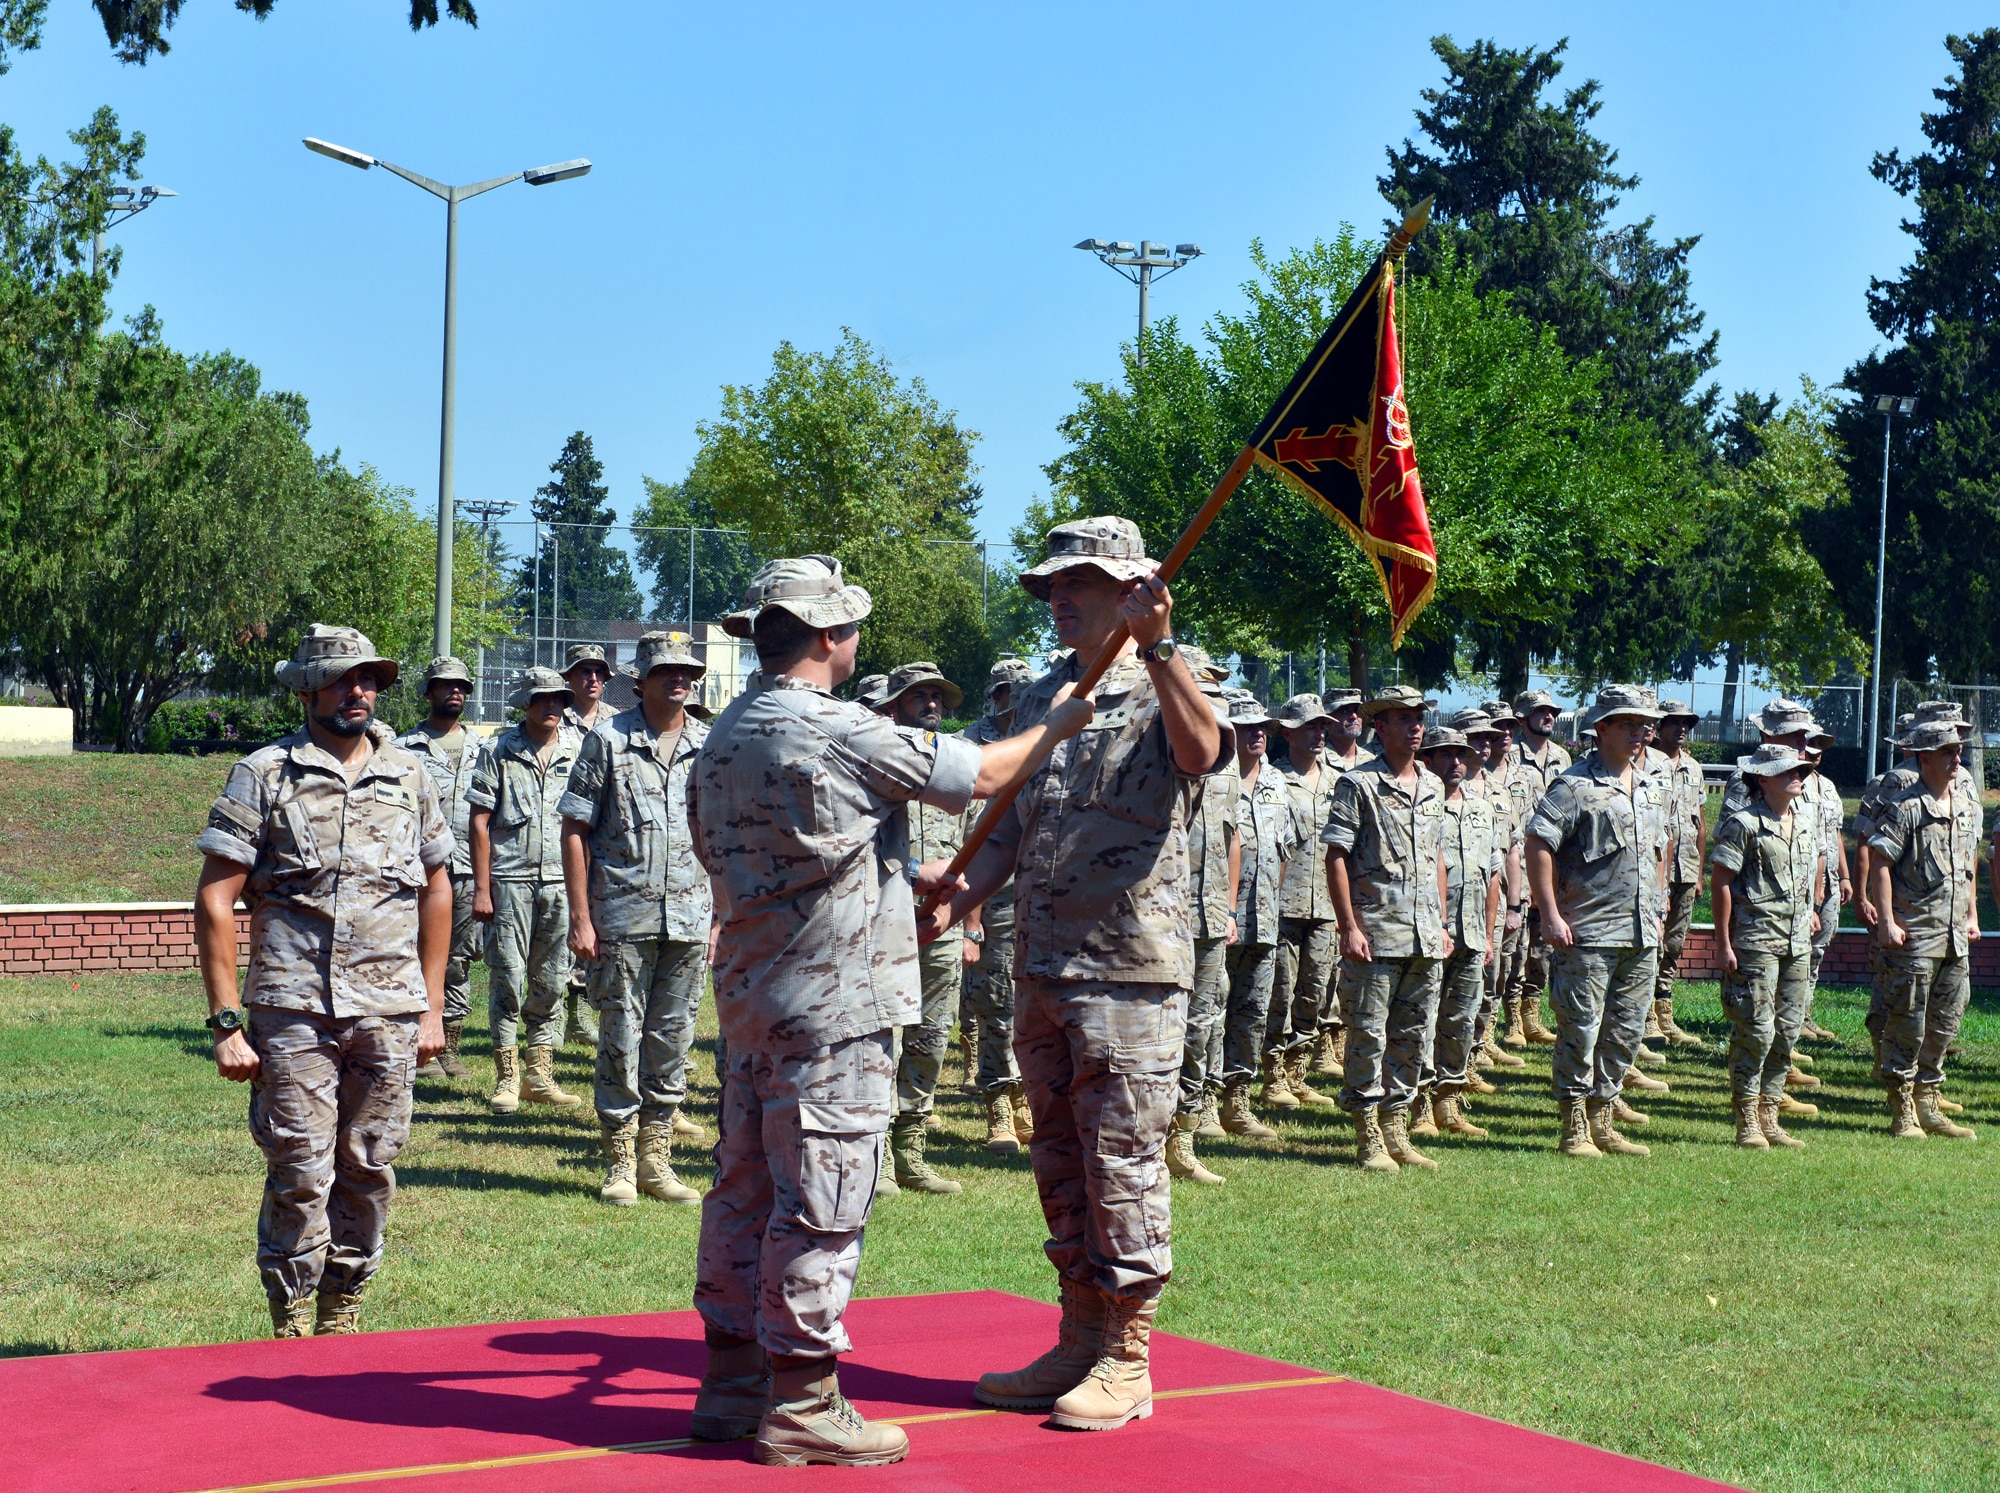 Spanish CDR. Jorge Cotorruelo, outgoing Spanish Patriot Unit commander, passes on the unit guidon to Army Artillery LTC Juan Castilla, incoming SPU commander, during a Transfer of Authority ceremony July 22, 2015, at Incirlik Air Base, Turkey. The Spanish unit has been deployed to Incirlik since January in support of Operation Active Fence. (U.S. Air Force photo by Senior Airman Michael Battles/Released)